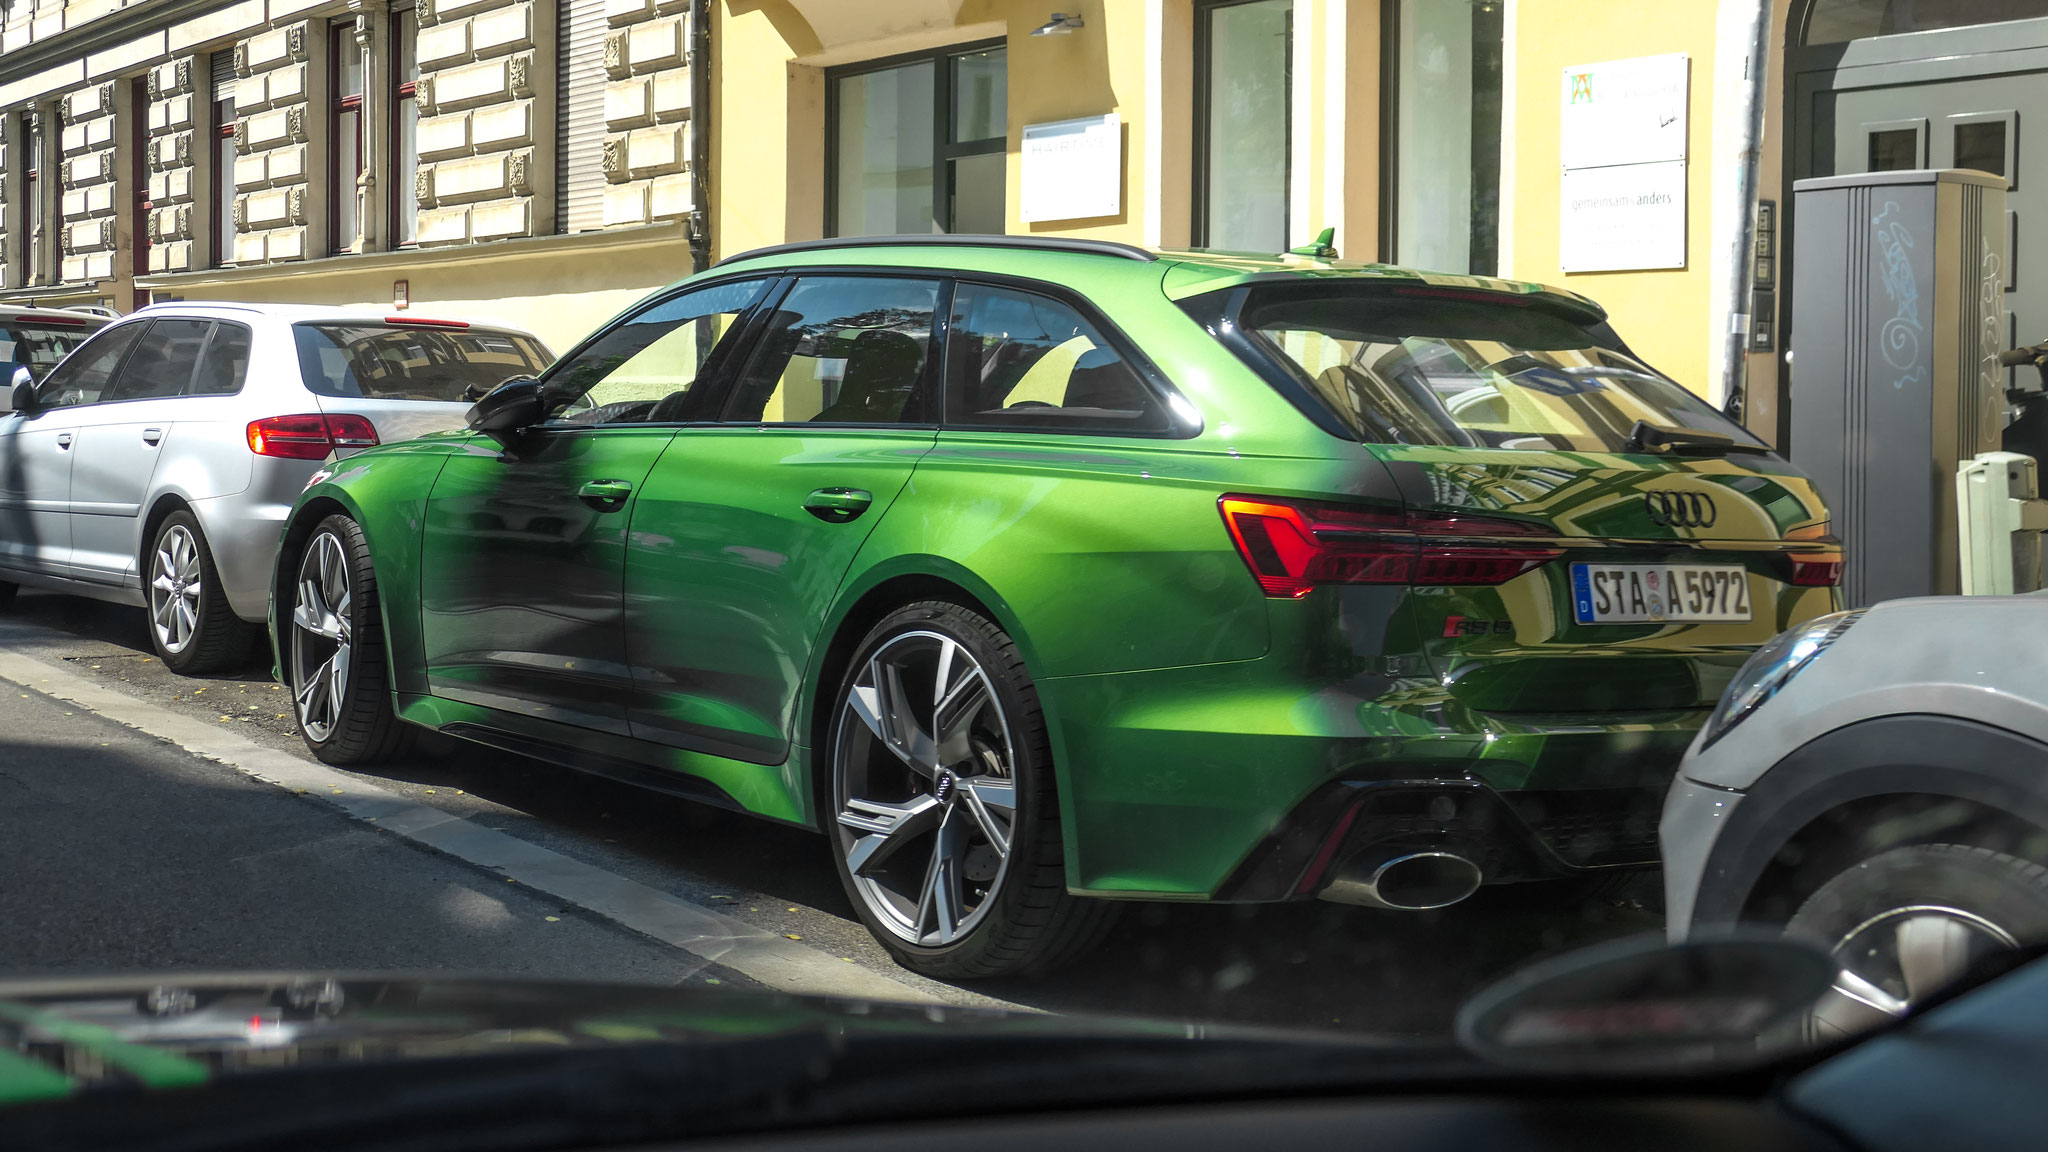 Audi RS6 - STA-A5972